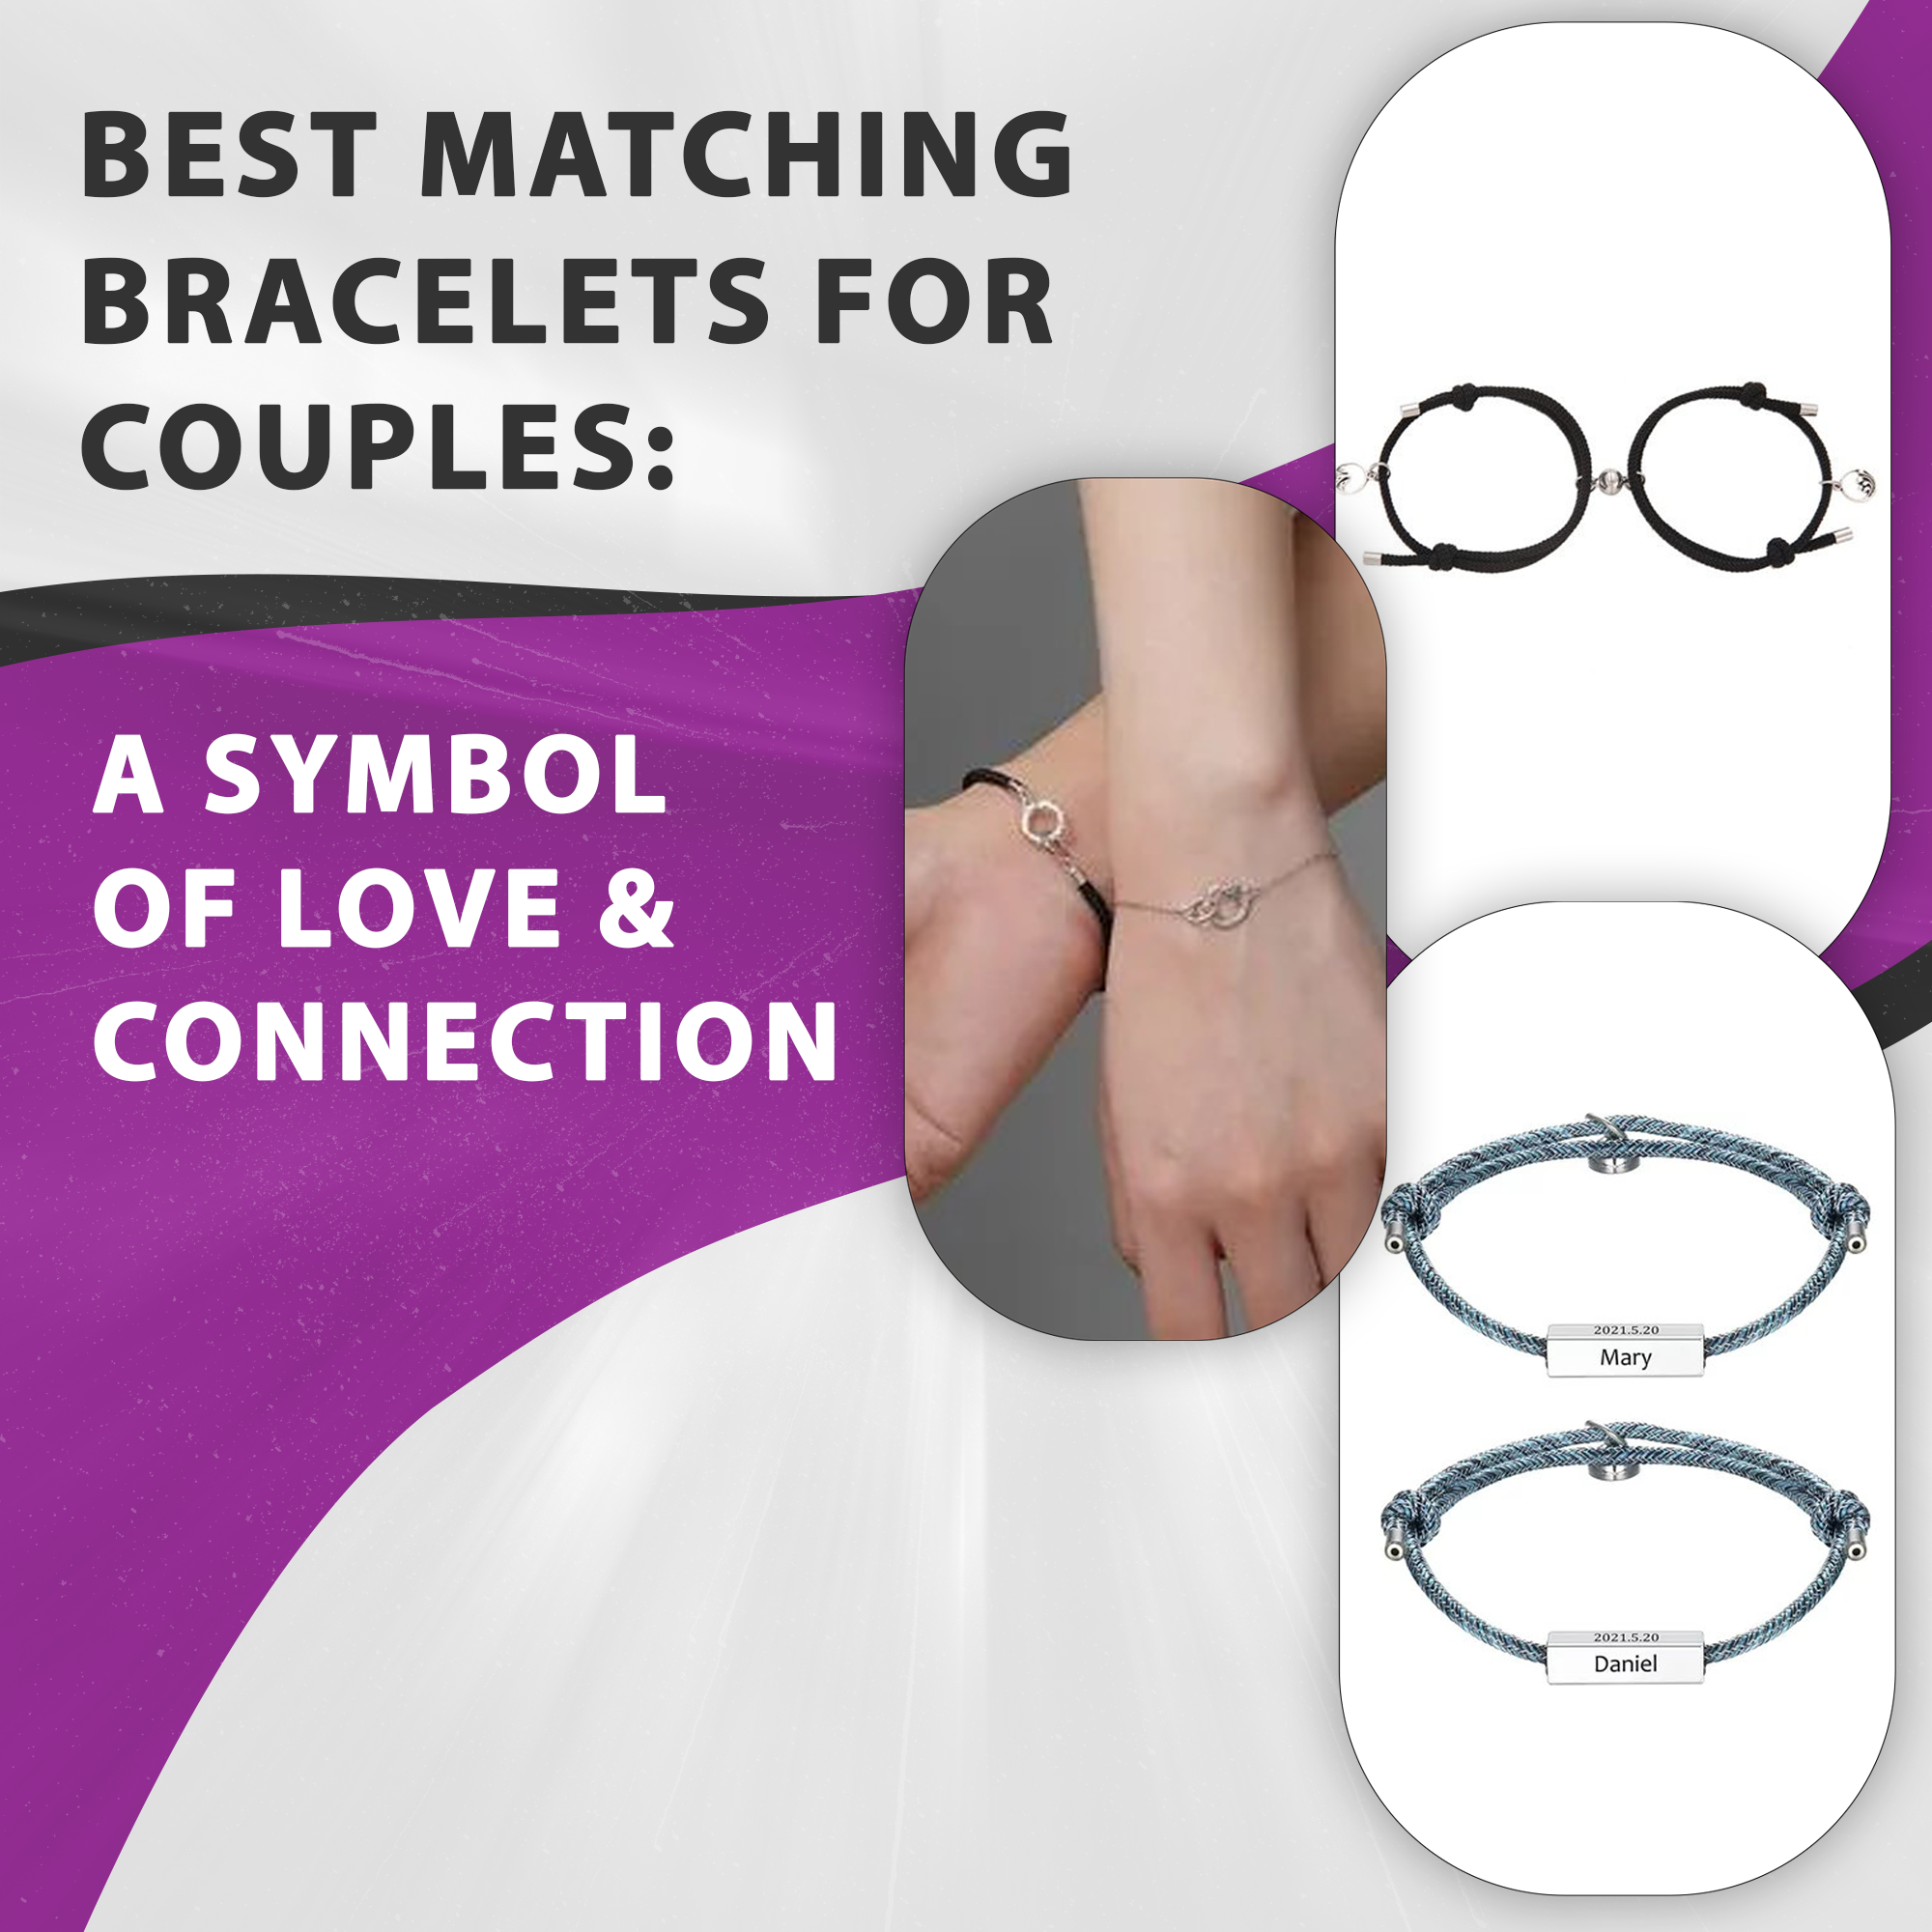 Best Matching Bracelets For Couples: A Symbol Of Love & Connection